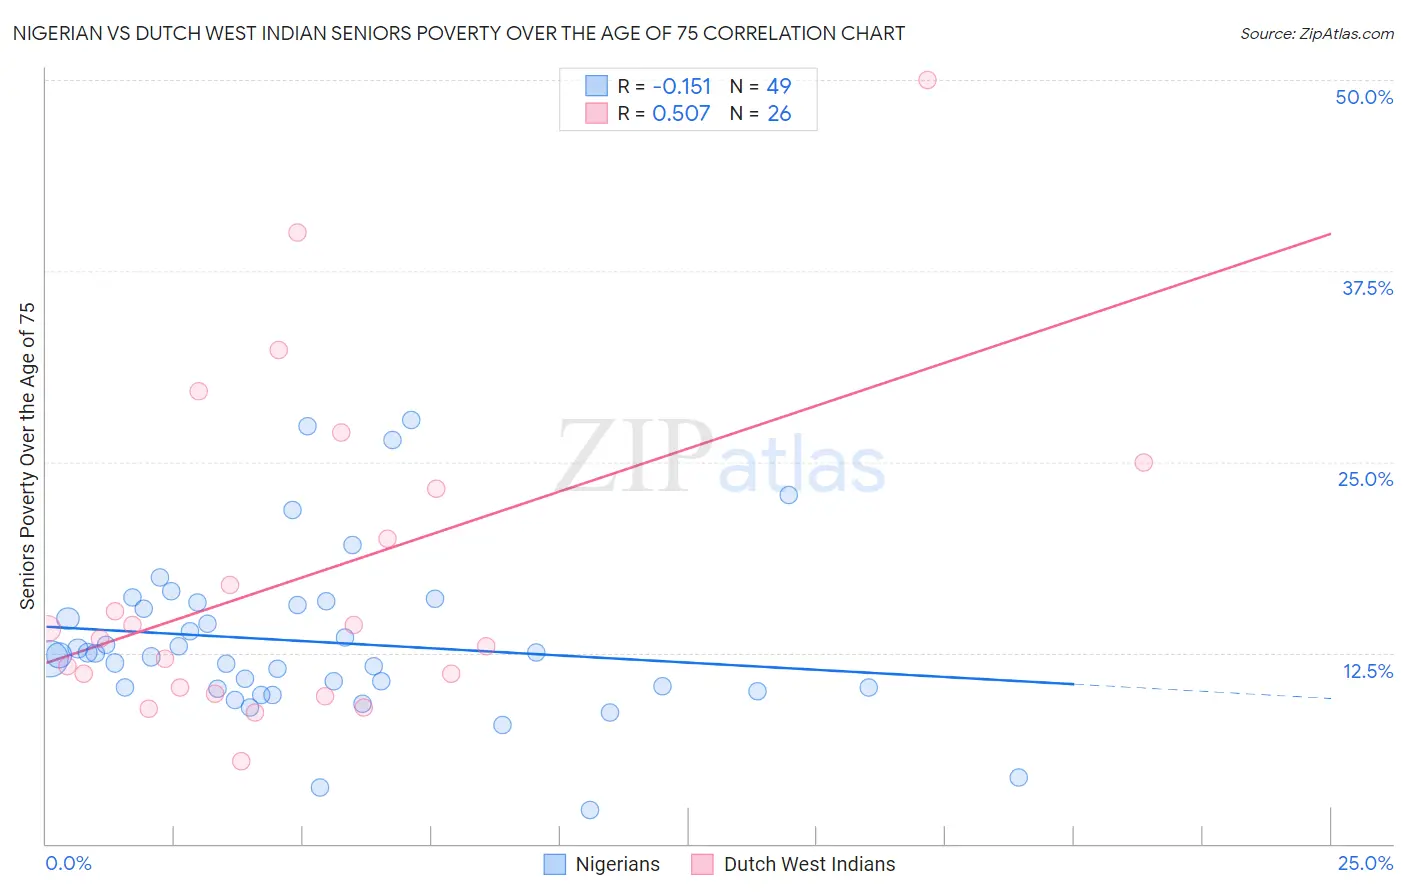 Nigerian vs Dutch West Indian Seniors Poverty Over the Age of 75